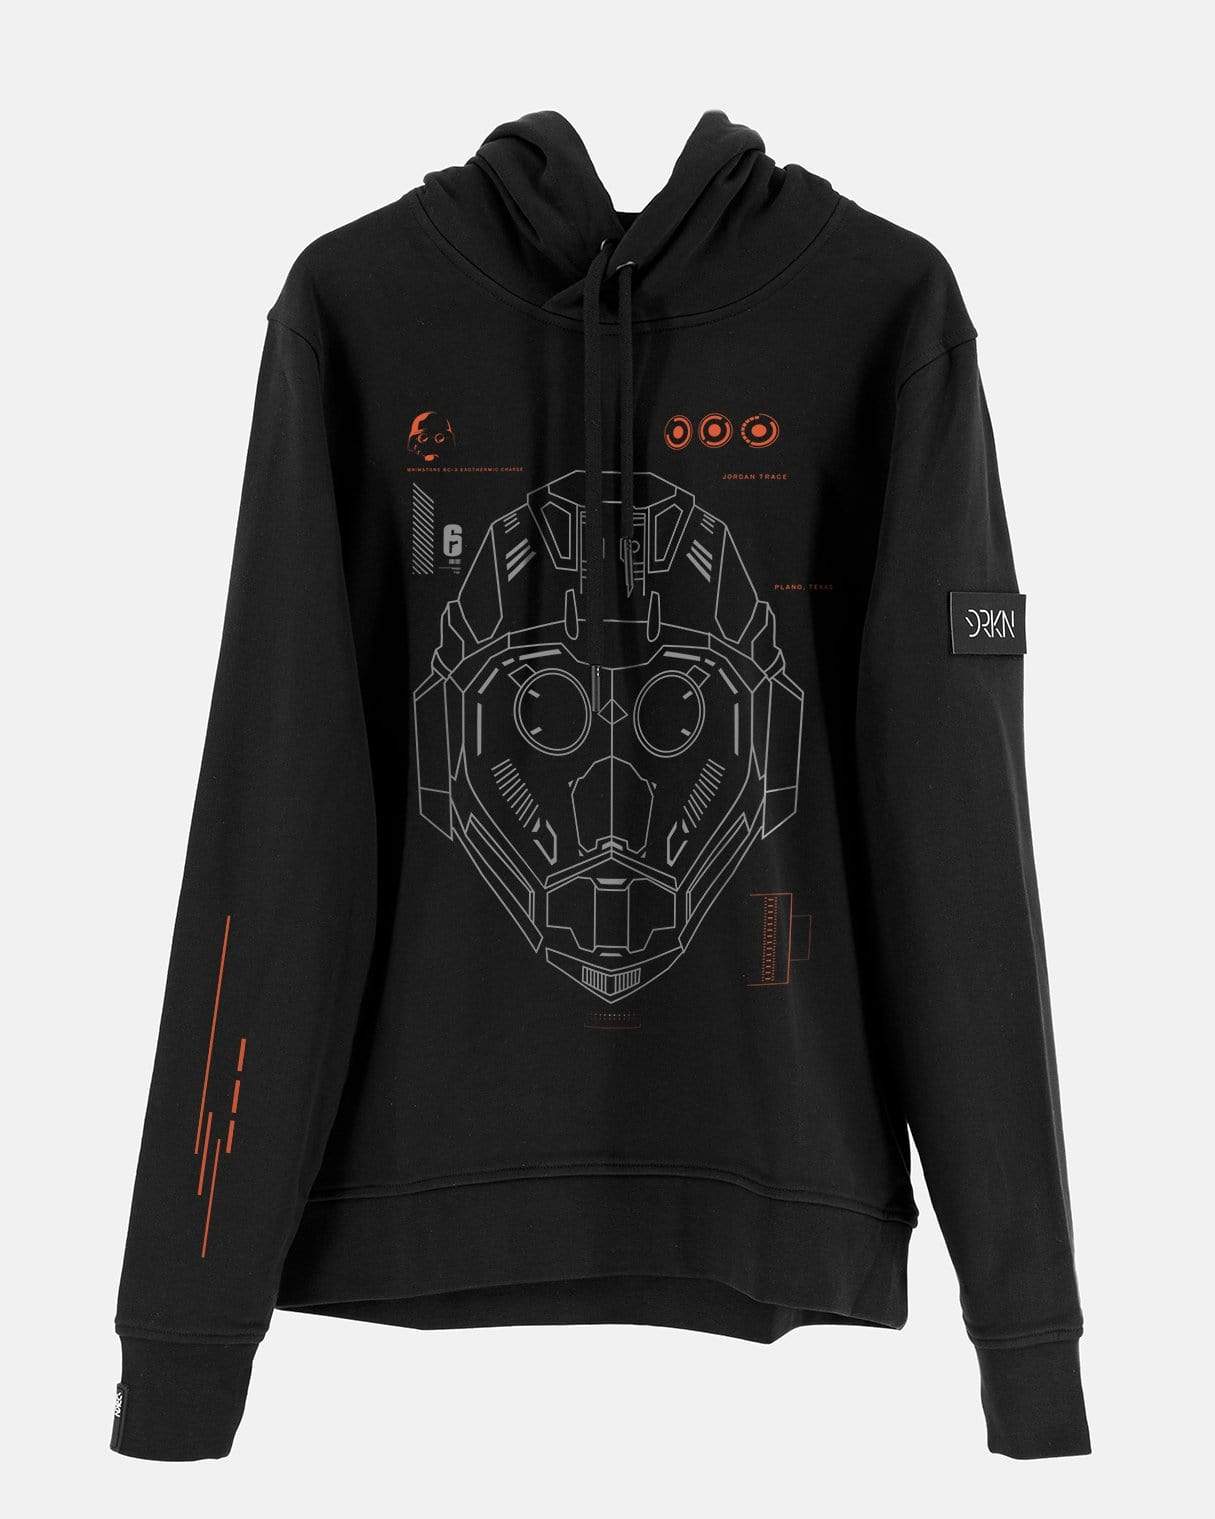 The first DRKN hoodie with an NFC tag in the rubber label. Black hoodie with white and orange prints. Read the NFC tag to unlock a Thermite skin in-game - Rainbow Six.